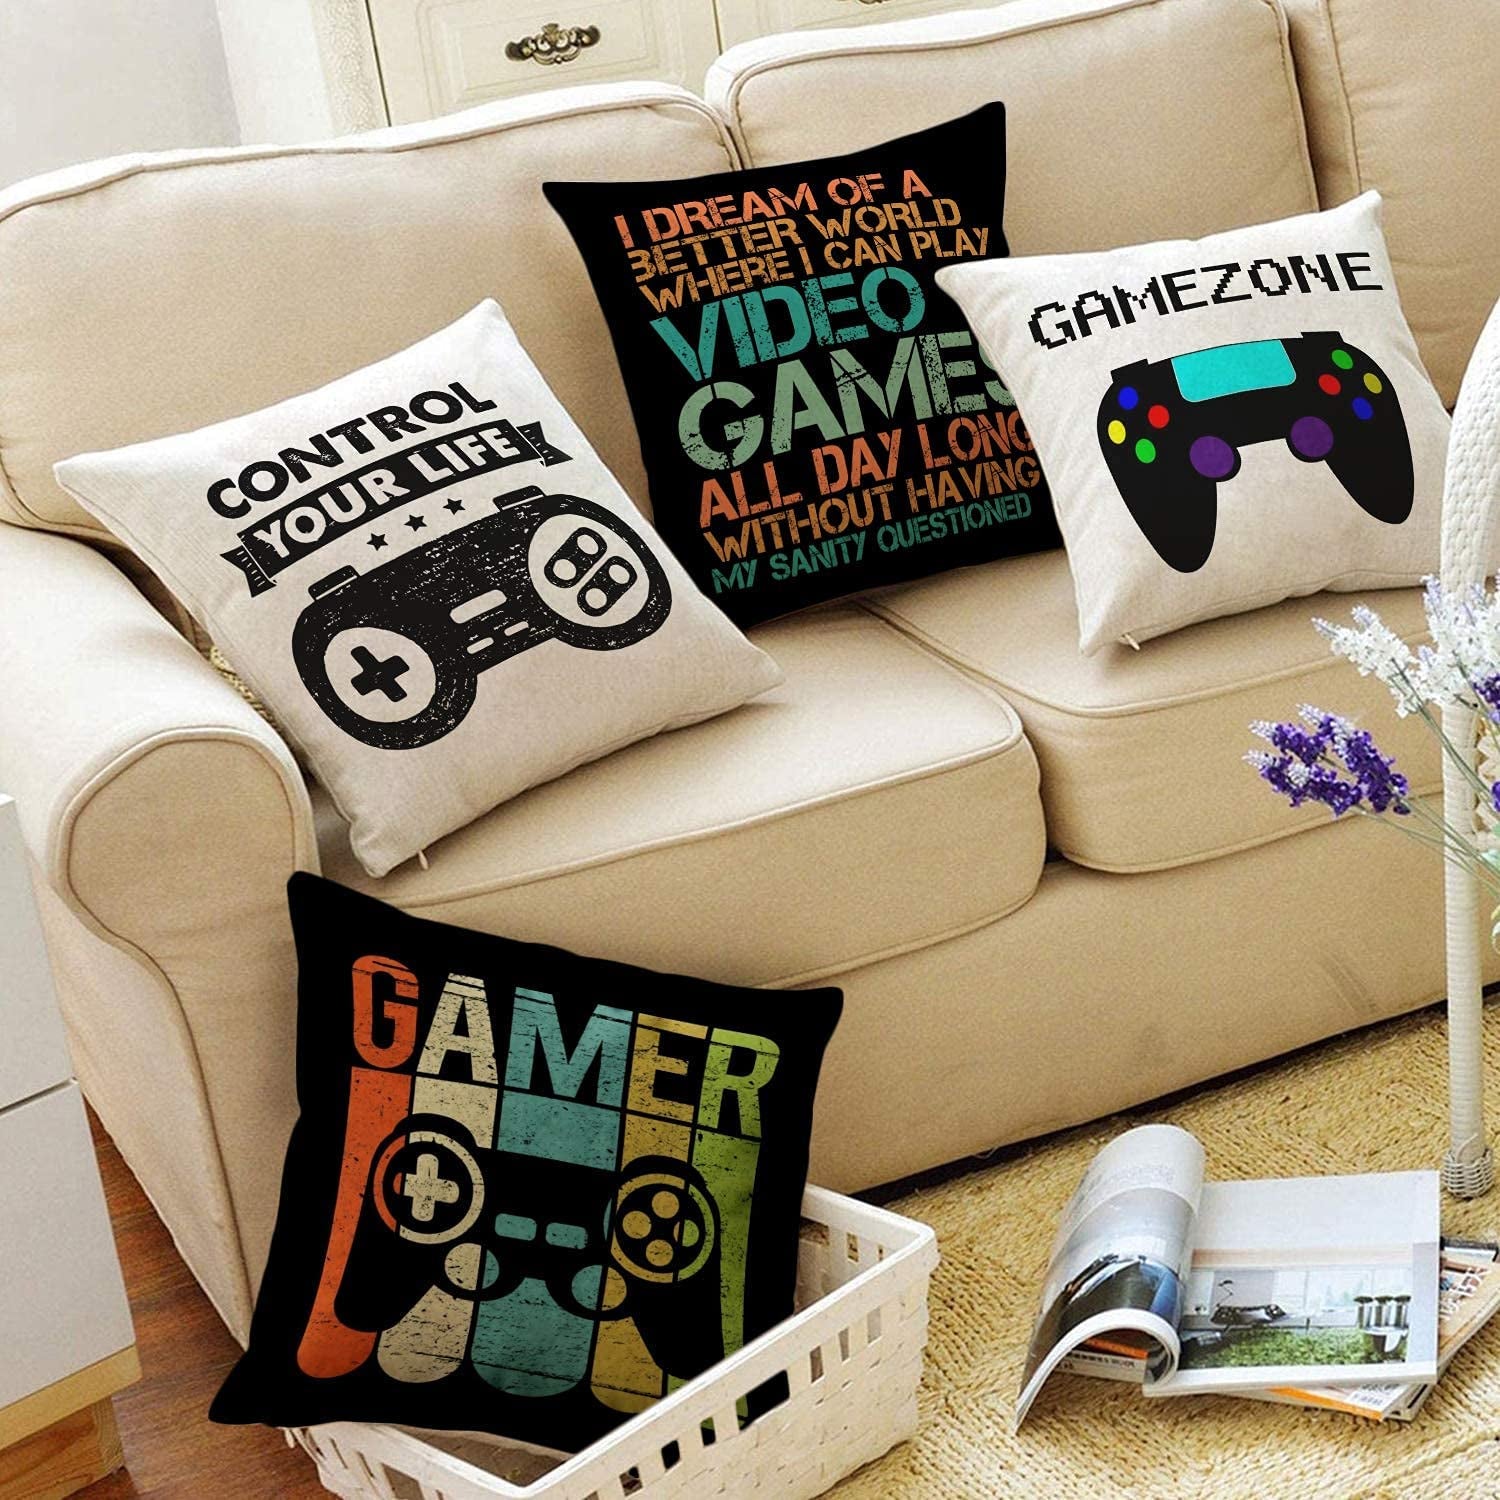 Gamer Game Controller Set of 4 Linen Square Throw Pillow Video Games Case Cushion Cover for Playroom Office Bed Sofa Decor 18"X 18"